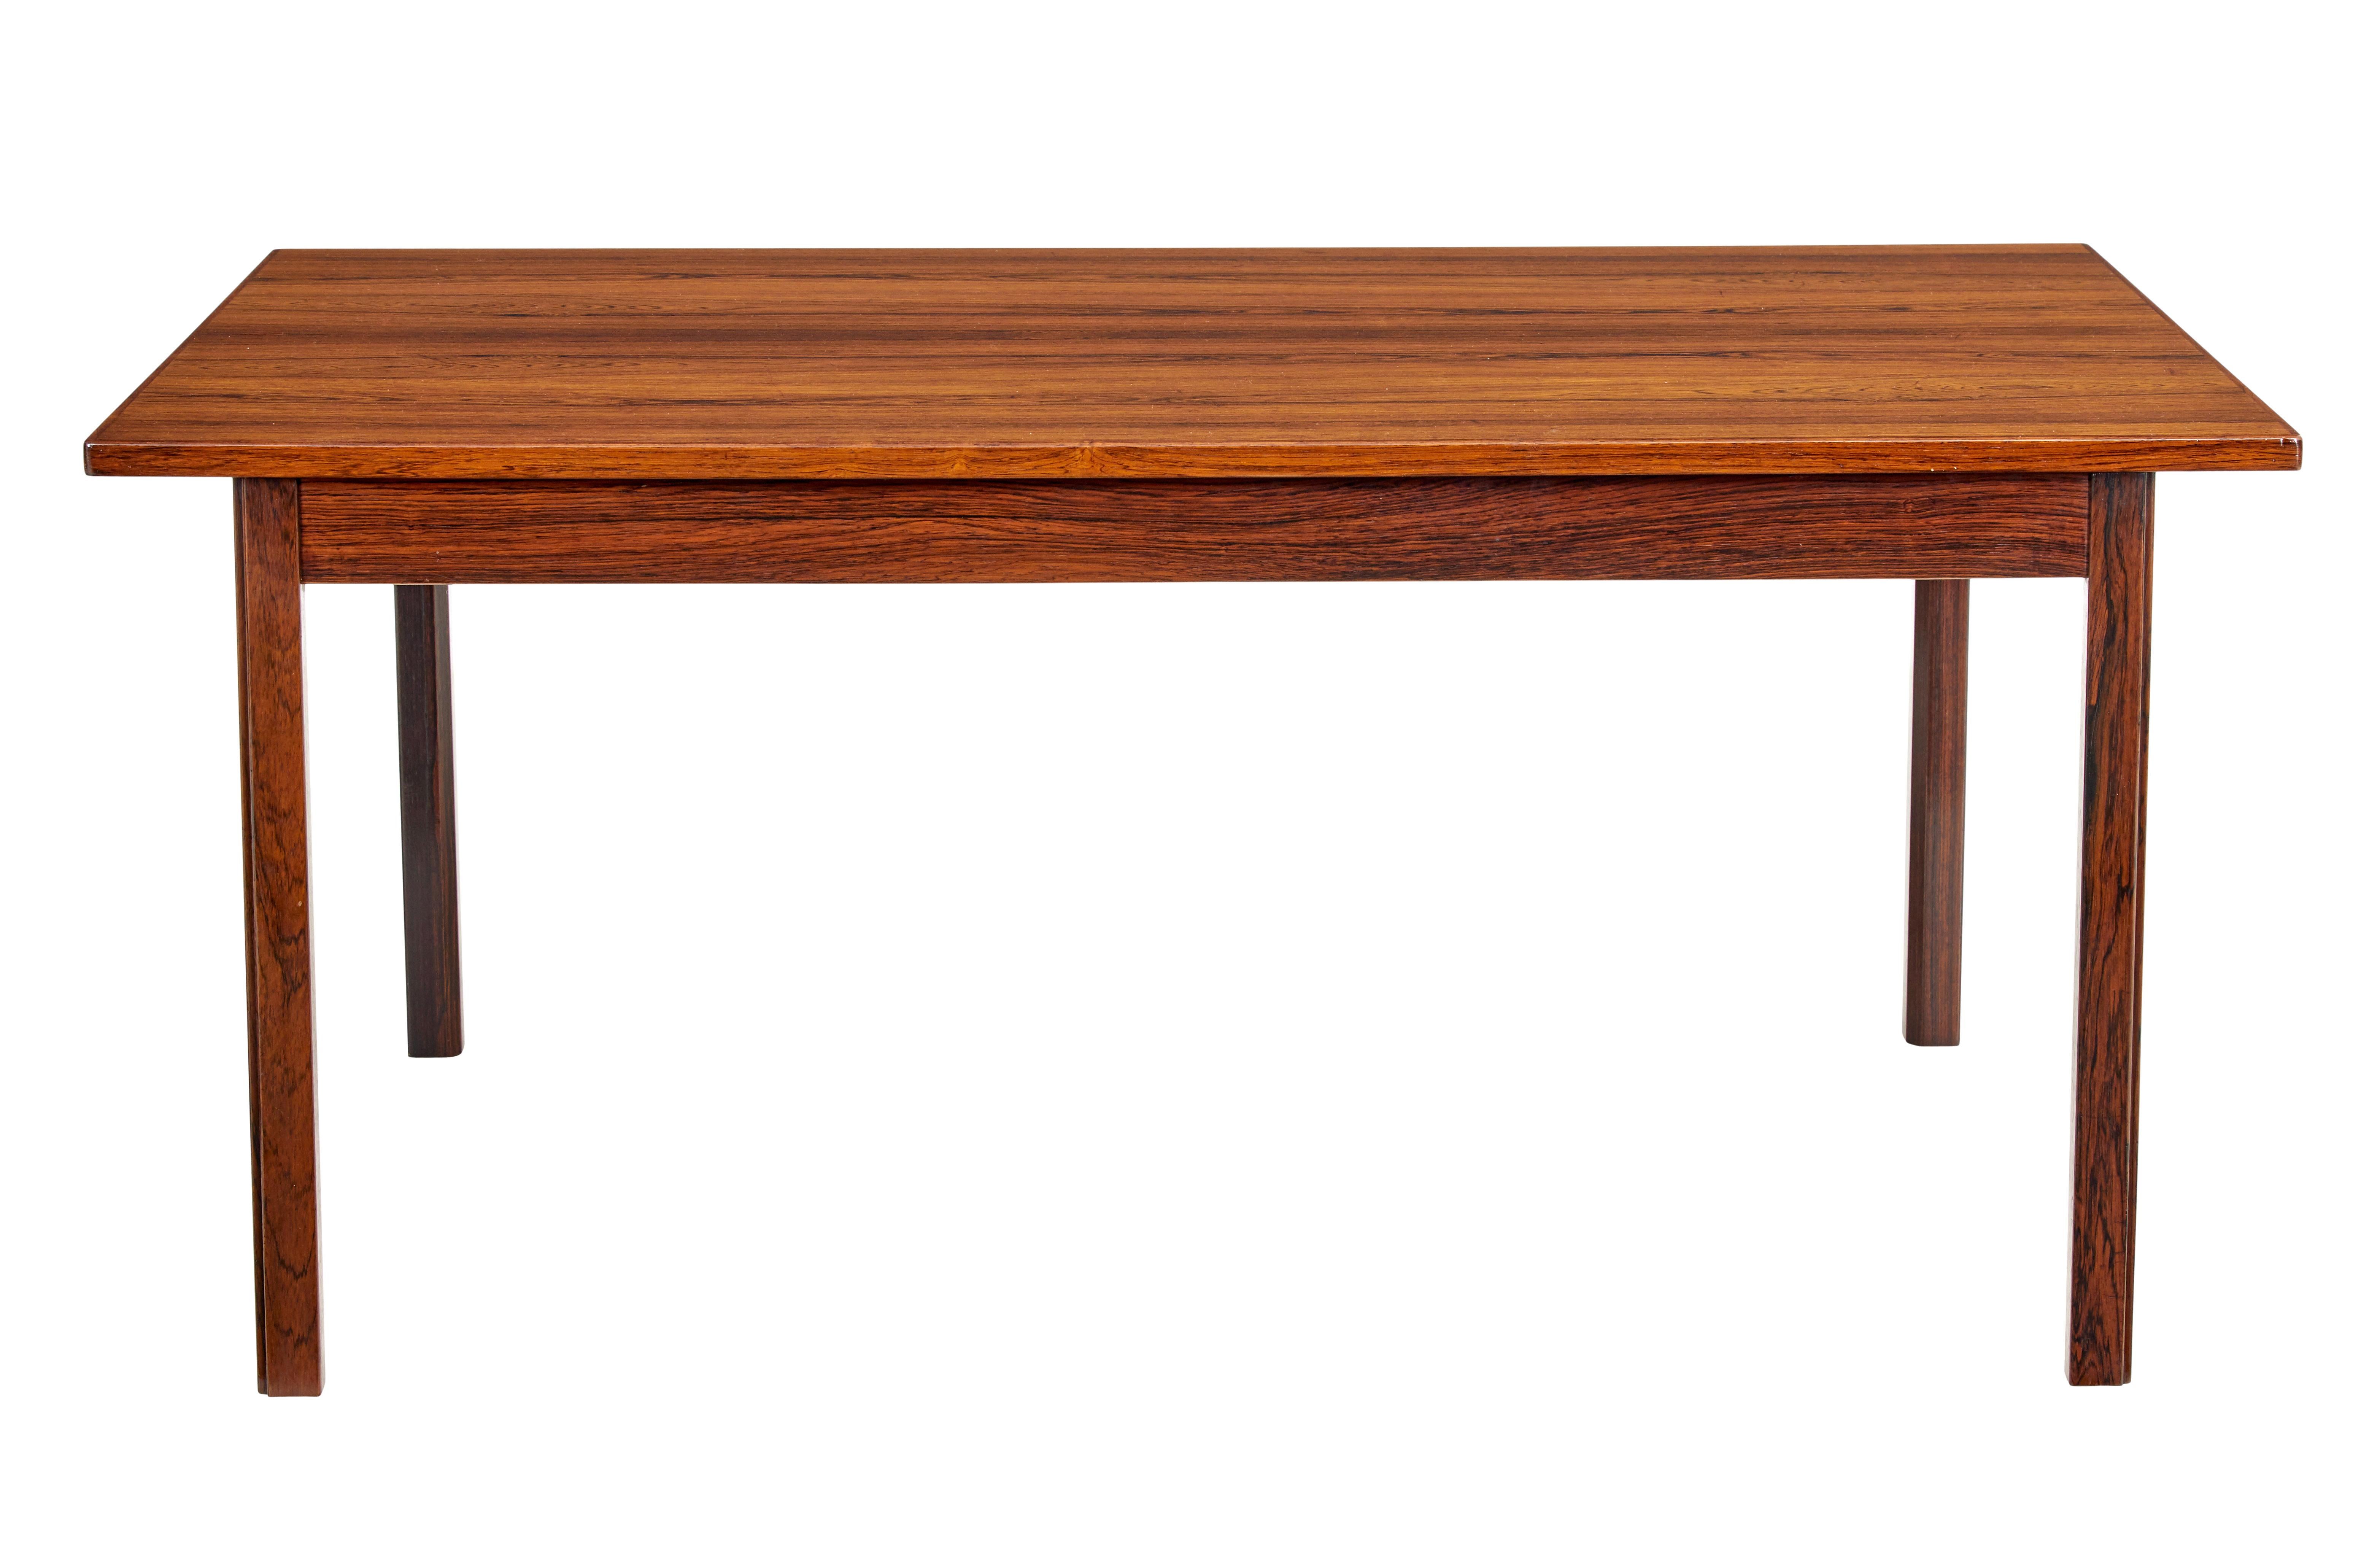 Mid-20th century Scandinavian coffee table circa 1970.

Danish made coffee table veneered in palisander. Slightly over sailing top, standing on straight legs.

Minor surface marks from use, recently re-polished and ready for everyday